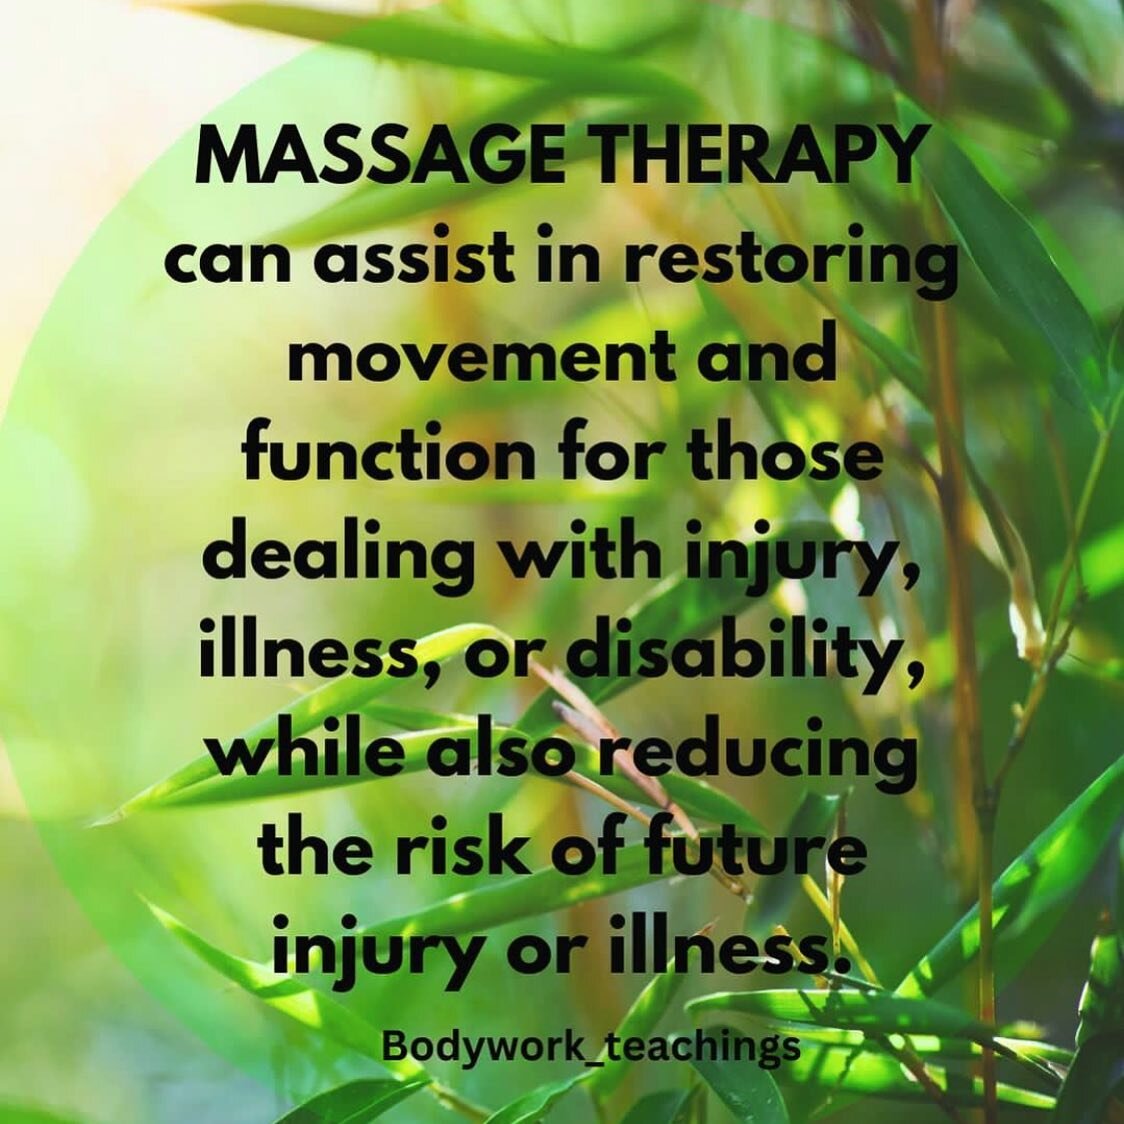 We love this from @bodywork_teachings. We often think about massage for relaxation and stress-relief, but don't forget how it can also help improve your mobility and quality of movement and life! 

Call us to book your next massage: 407-366-6770